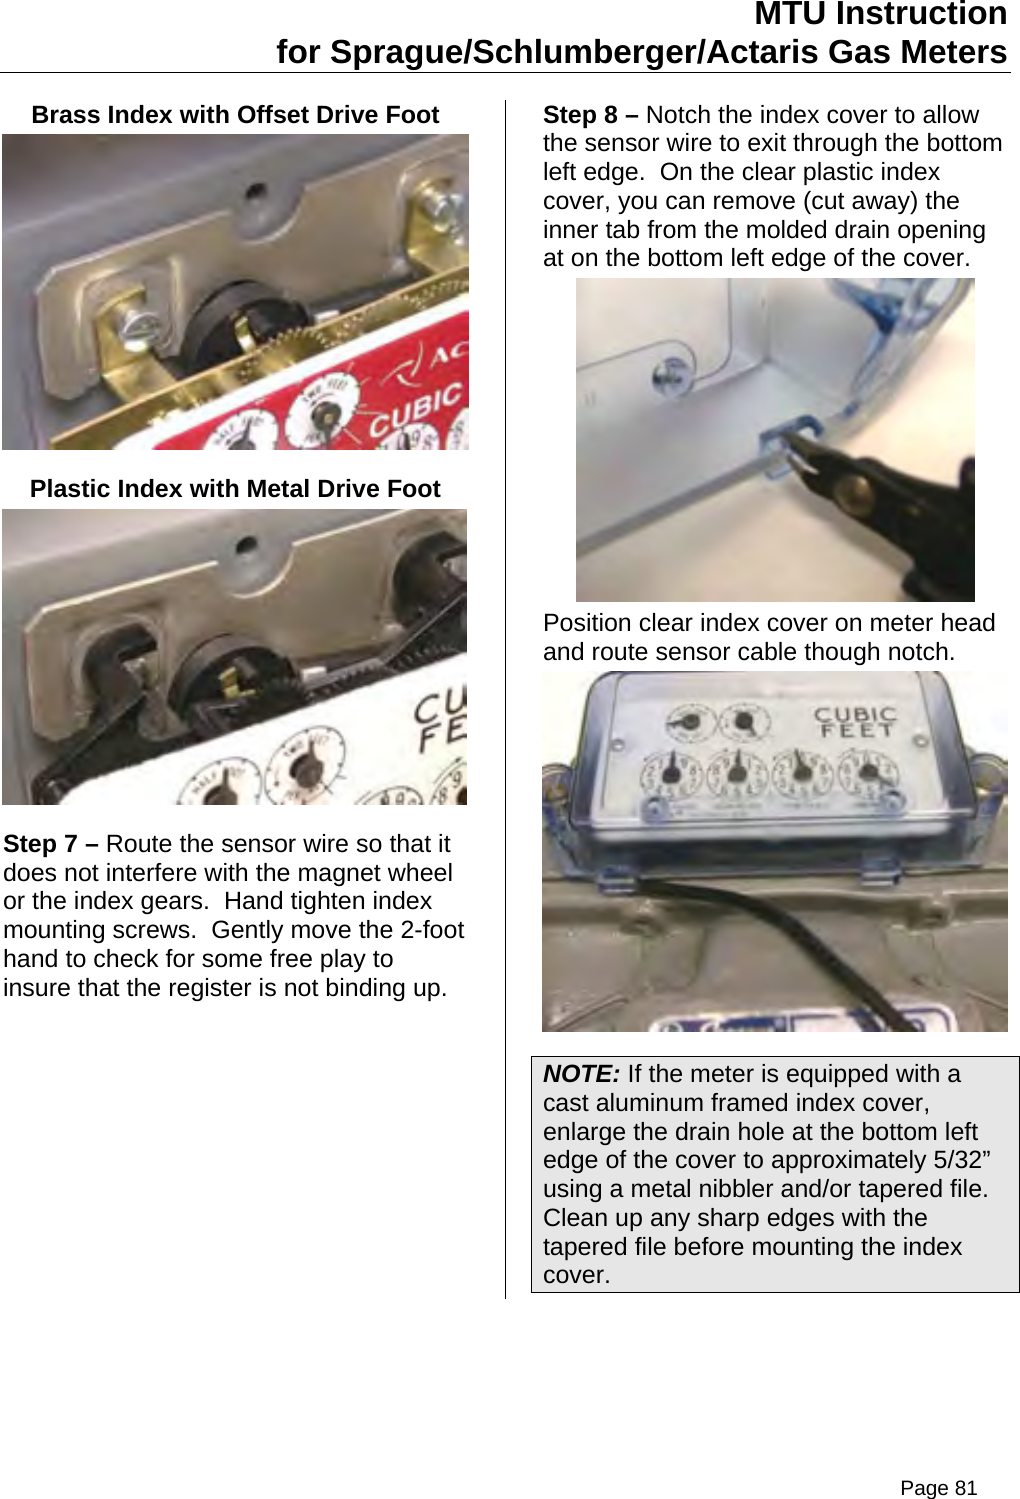 MTU Instruction for Sprague/Schlumberger/Actaris Gas Meters Brass Index with Offset Drive Foot  Plastic Index with Metal Drive Foot  Step 7 – Route the sensor wire so that it does not interfere with the magnet wheel or the index gears.  Hand tighten index mounting screws.  Gently move the 2-foot hand to check for some free play to insure that the register is not binding up. Step 8 – Notch the index cover to allow the sensor wire to exit through the bottom left edge.  On the clear plastic index cover, you can remove (cut away) the inner tab from the molded drain opening at on the bottom left edge of the cover.  Position clear index cover on meter head and route sensor cable though notch.  NOTE: If the meter is equipped with a cast aluminum framed index cover, enlarge the drain hole at the bottom left edge of the cover to approximately 5/32” using a metal nibbler and/or tapered file.  Clean up any sharp edges with the tapered file before mounting the index cover. Page 81